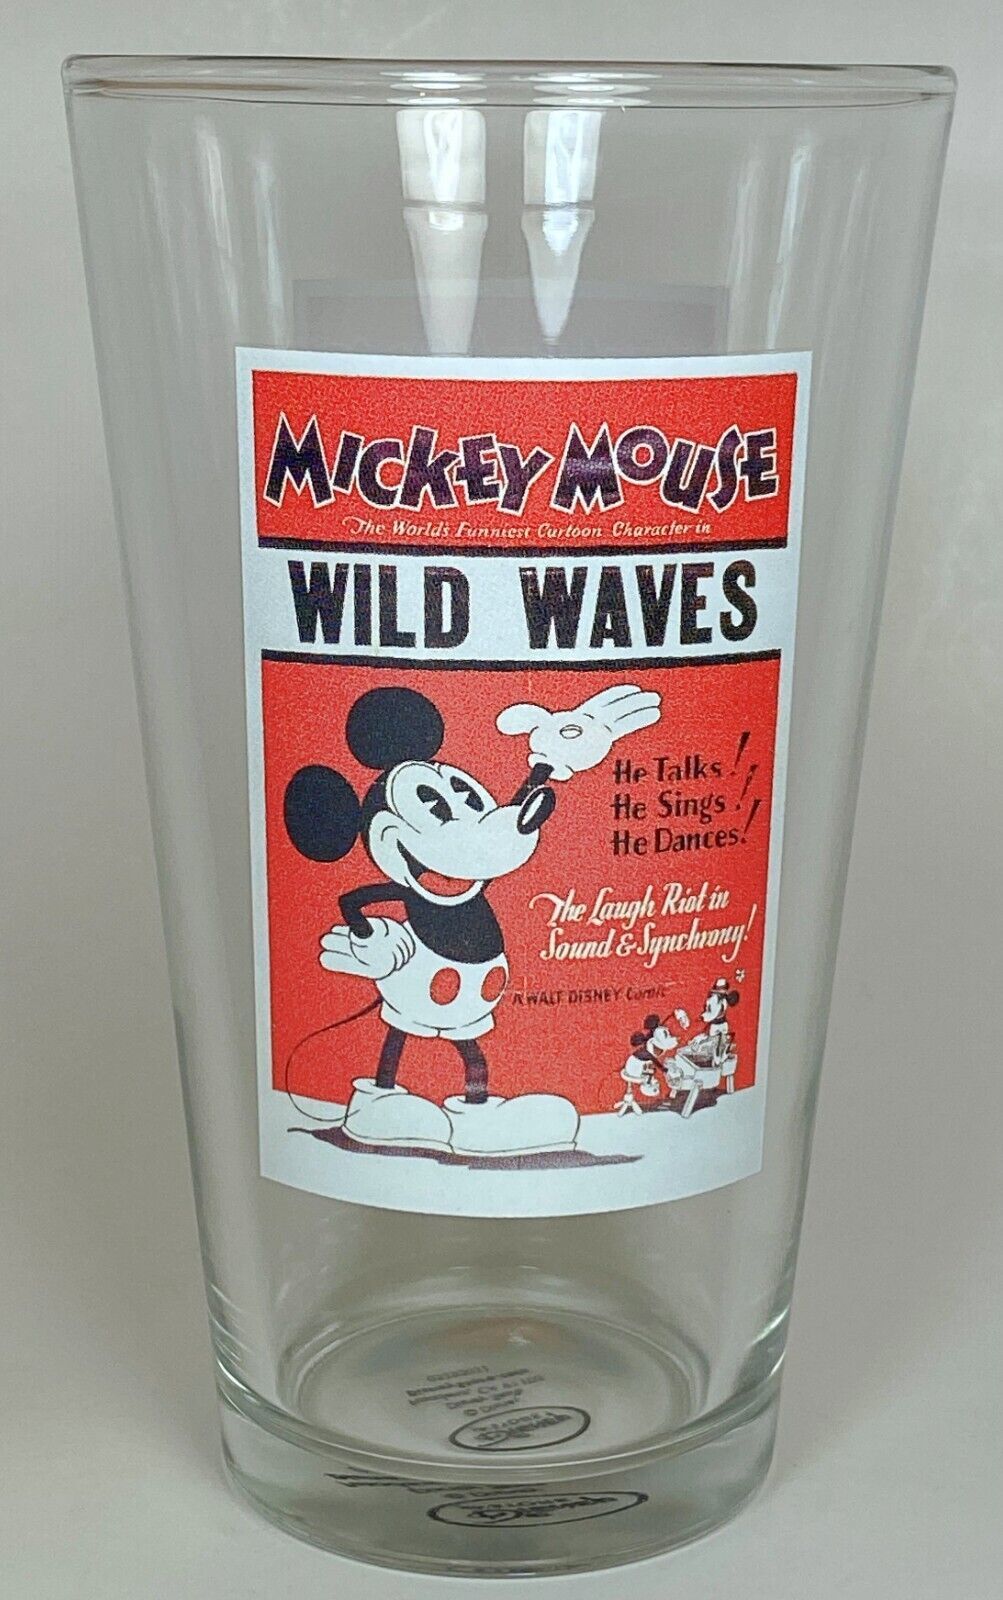 Disney Store 14oz Mickey Mouse Wild Waves Tall Clear Glass Vintage - $5.75